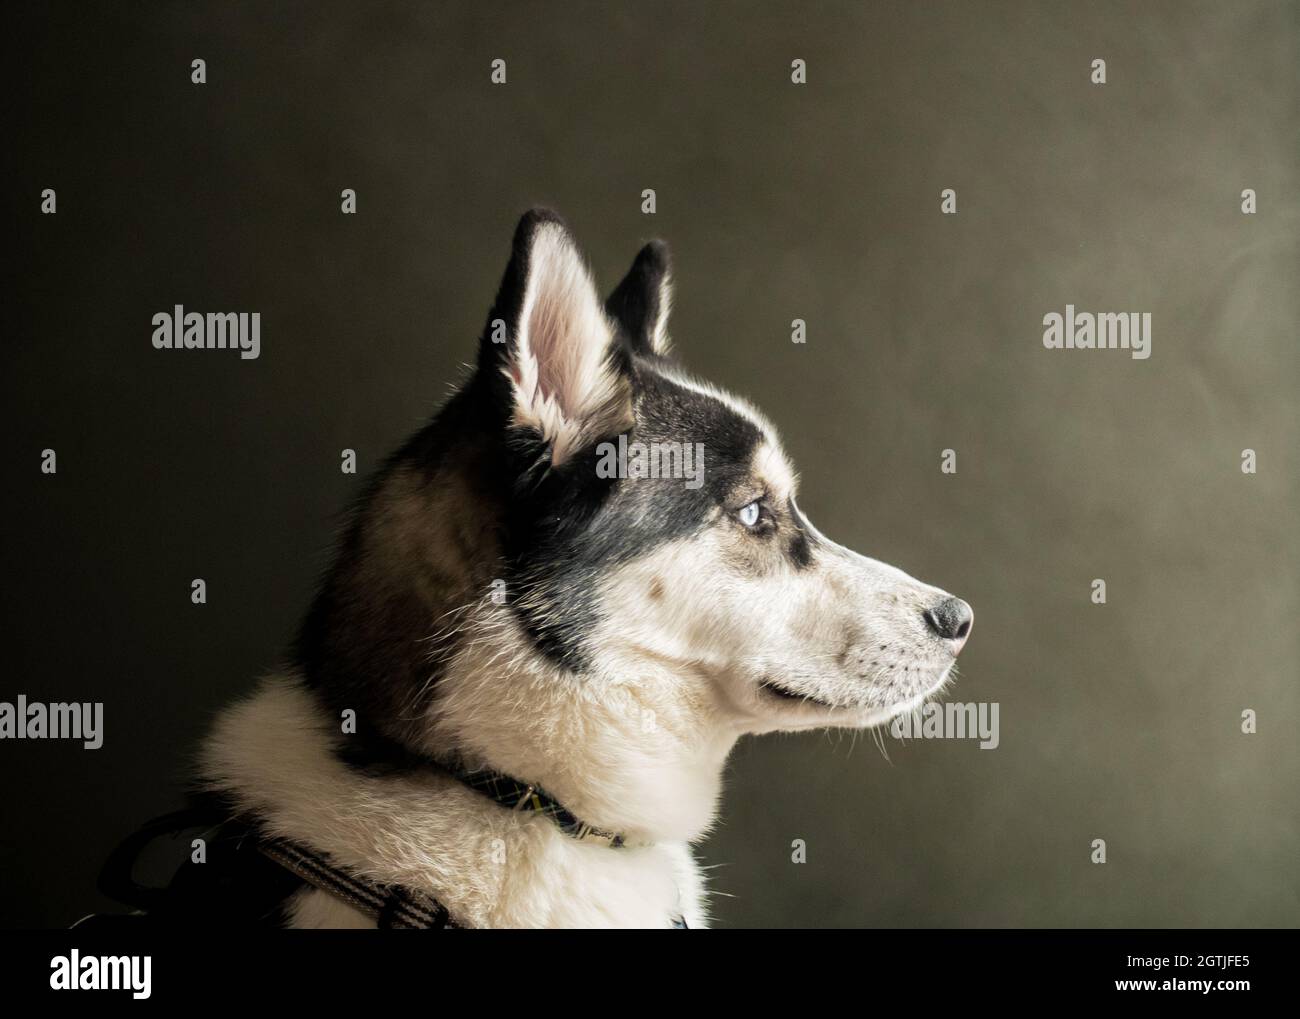 Dog Portrait Looking Right With Smoky Background Stock Photo